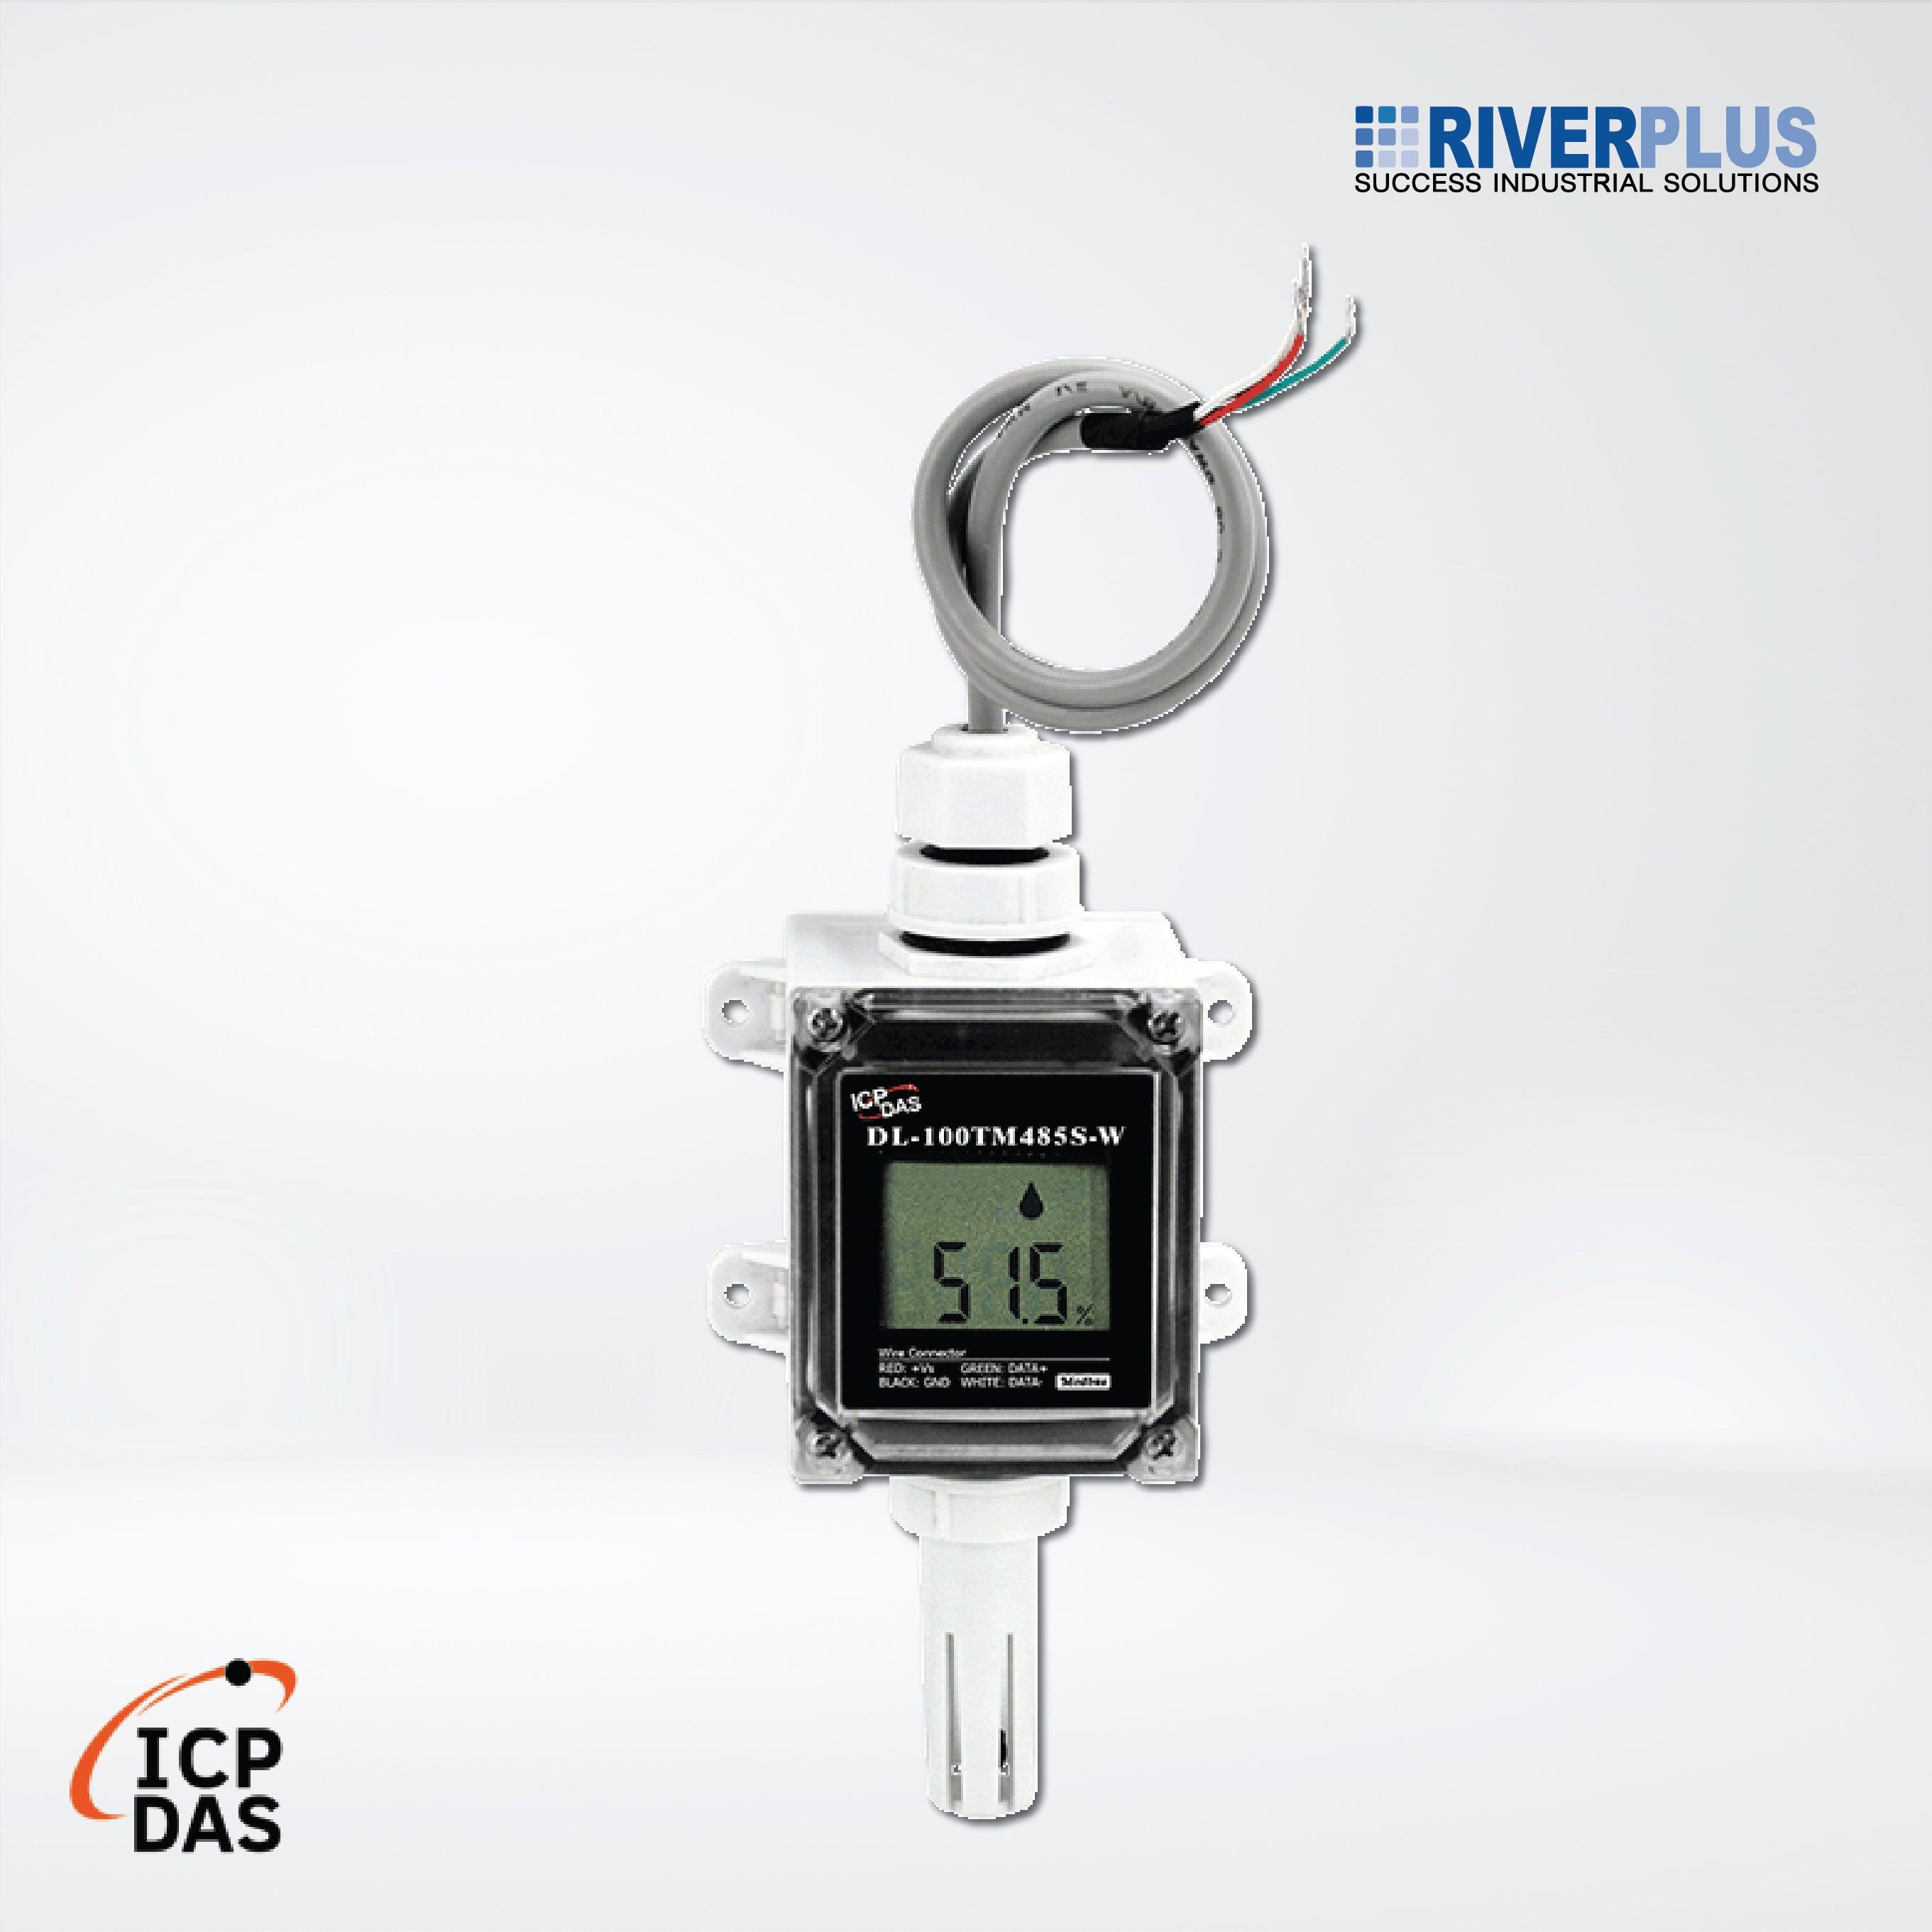 DL-100TM485S-W IP66 Remote Temperature and Humidity Data Logger with LCD Display (RS-485) - Riverplus